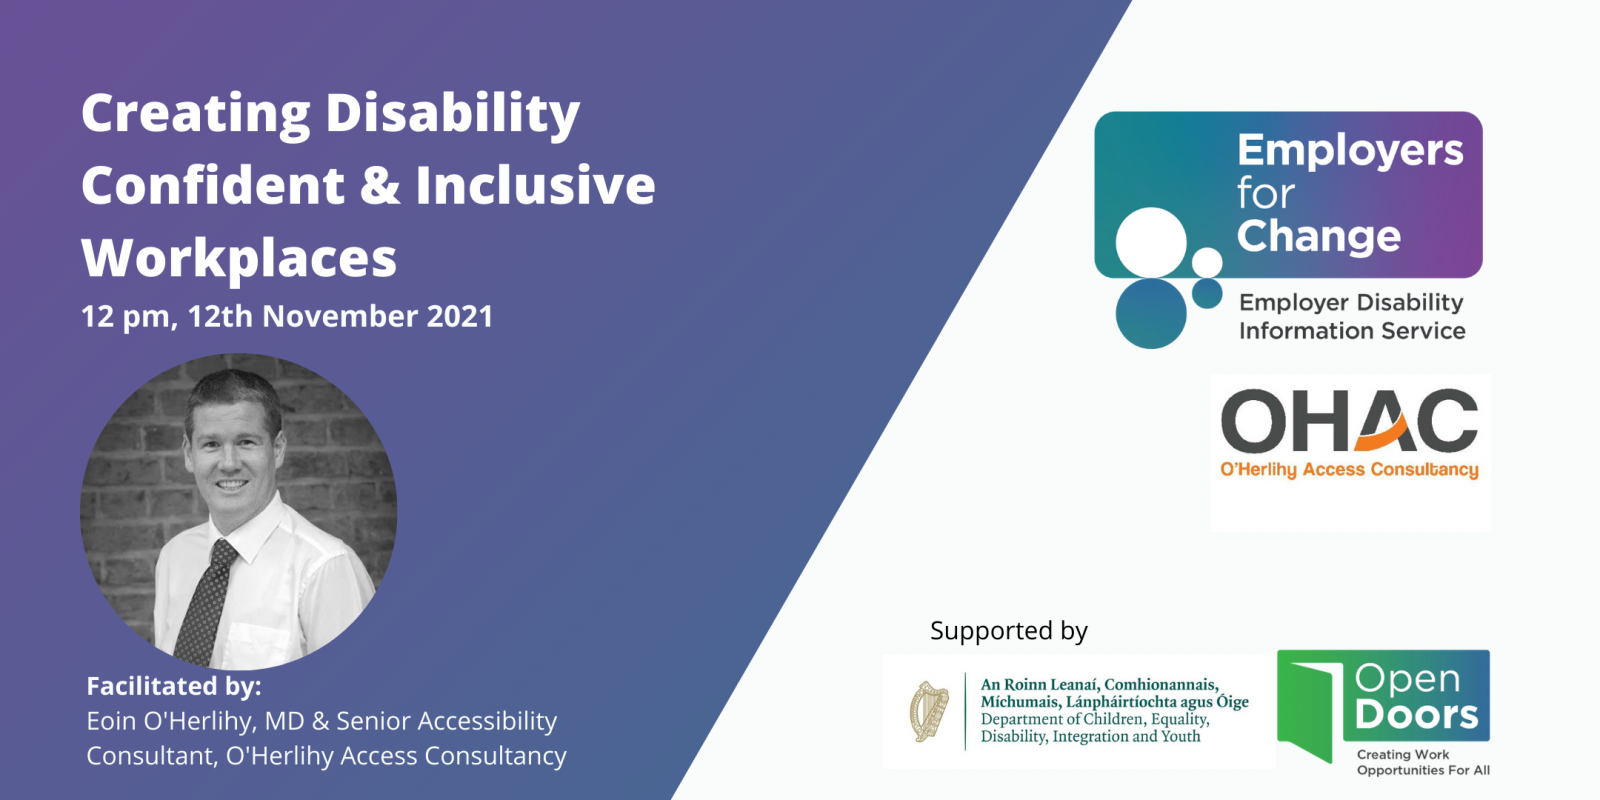 Purple and white rectangular box with a black and white headshot of the speaker and text reading Creating Disability Confident and Inclusive Workplaces 12 pm Friday, 12 November 2021. Facilitated by:  Eoin O'Herlihy, MD & Senior Accessibility Consultant, O'Herlihy Access Consultancy. Employers for Change 